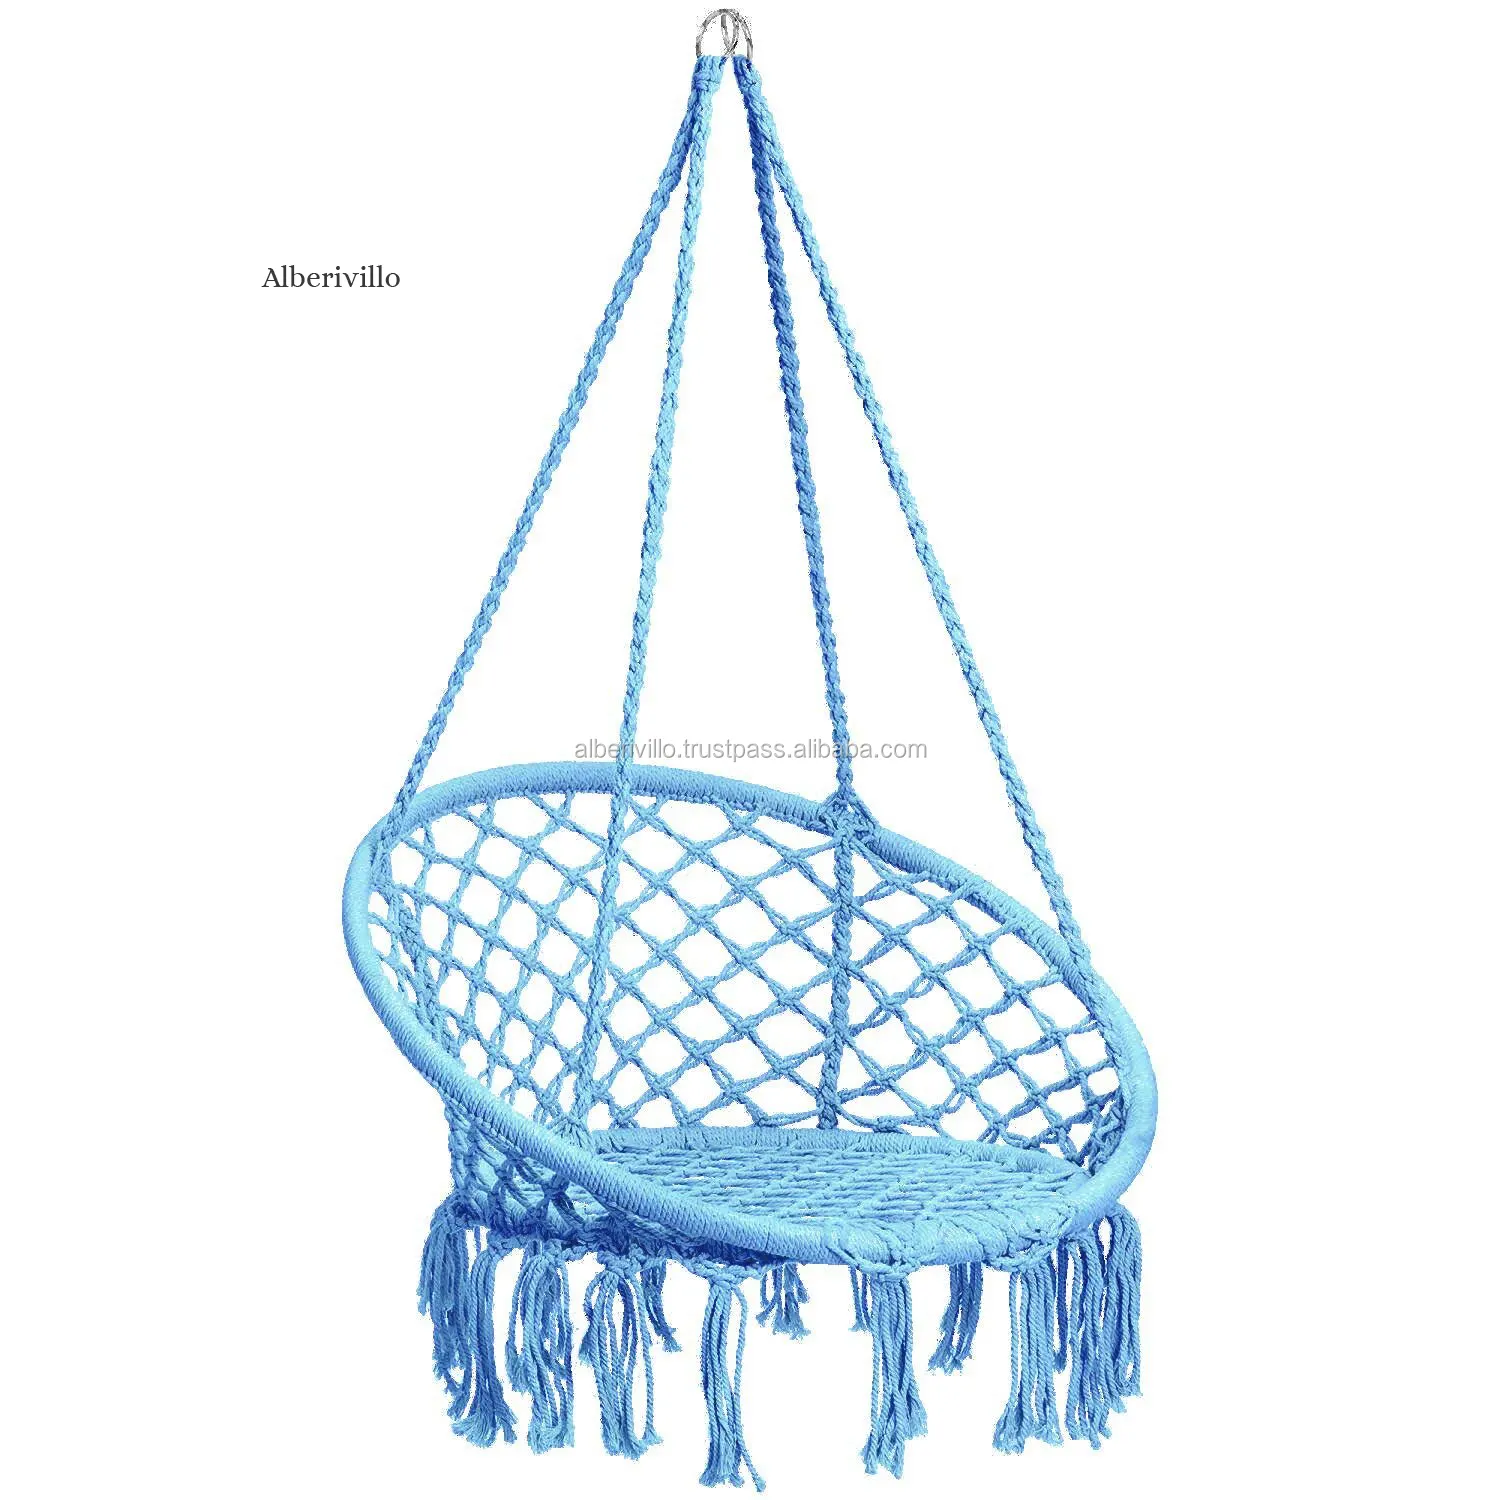 Boho Cotton Hammock Chair Macrame Swing for Indoor Outdoor Hanging Chairs